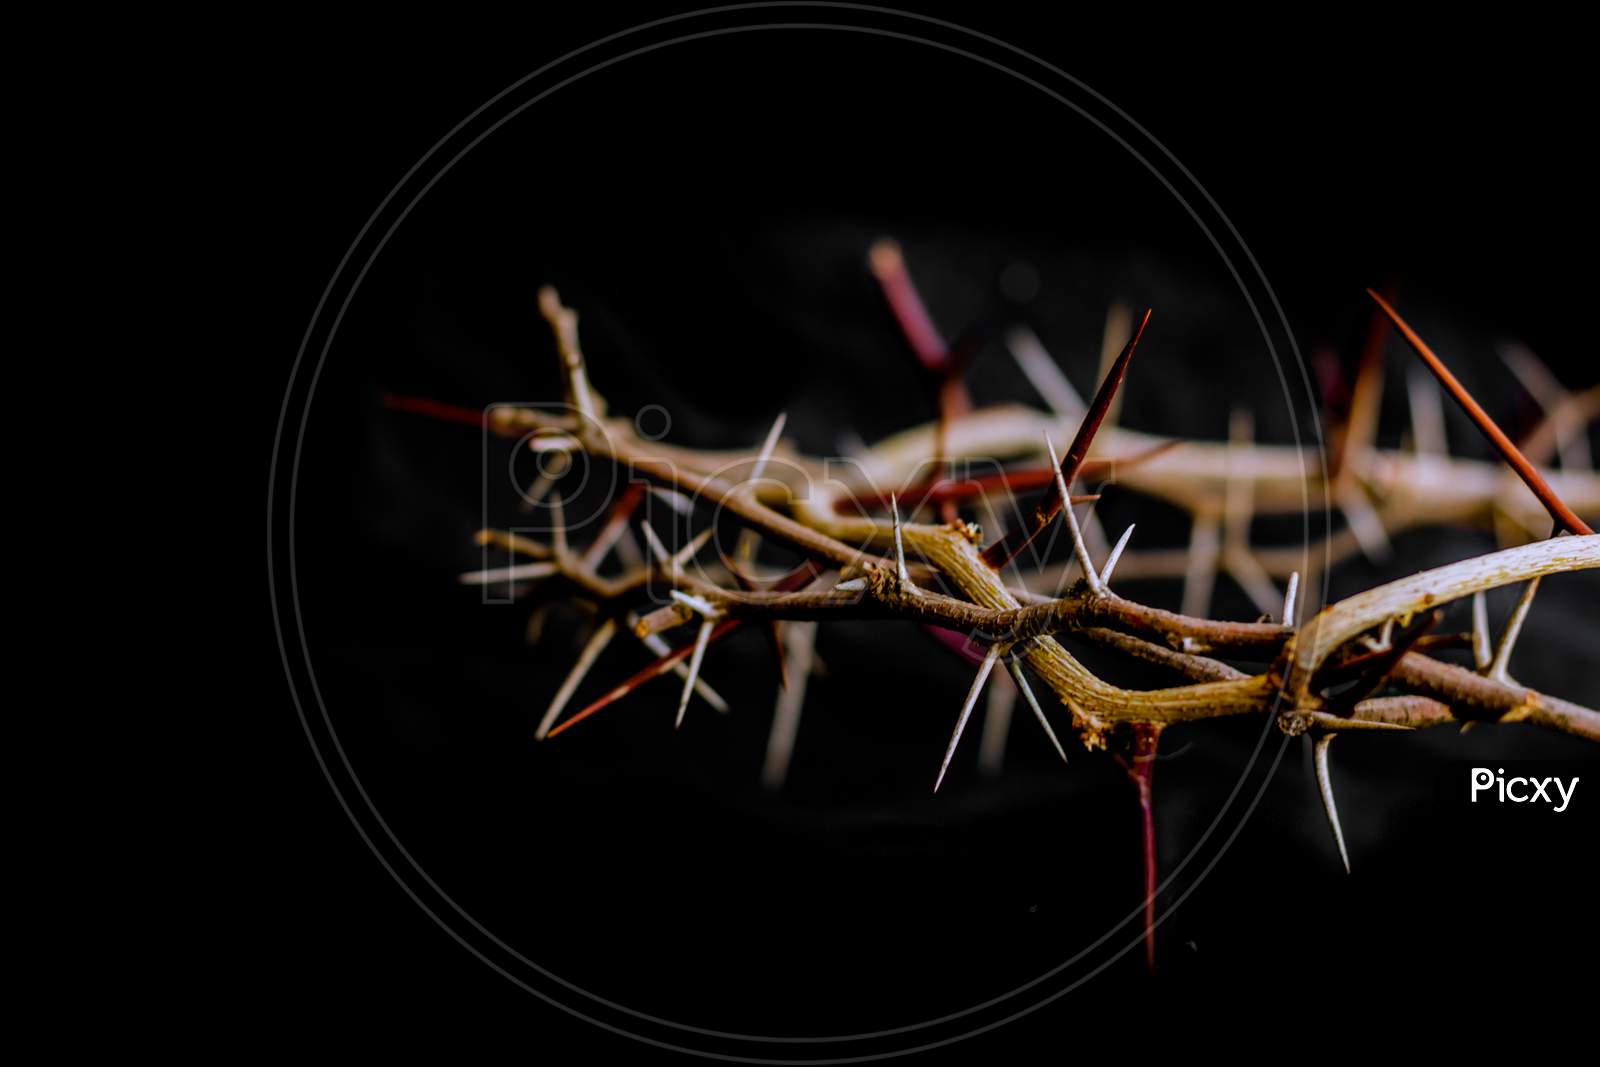 Crown Of Thorns And Nails Symbols Of The Christian Crucifixion In Easter